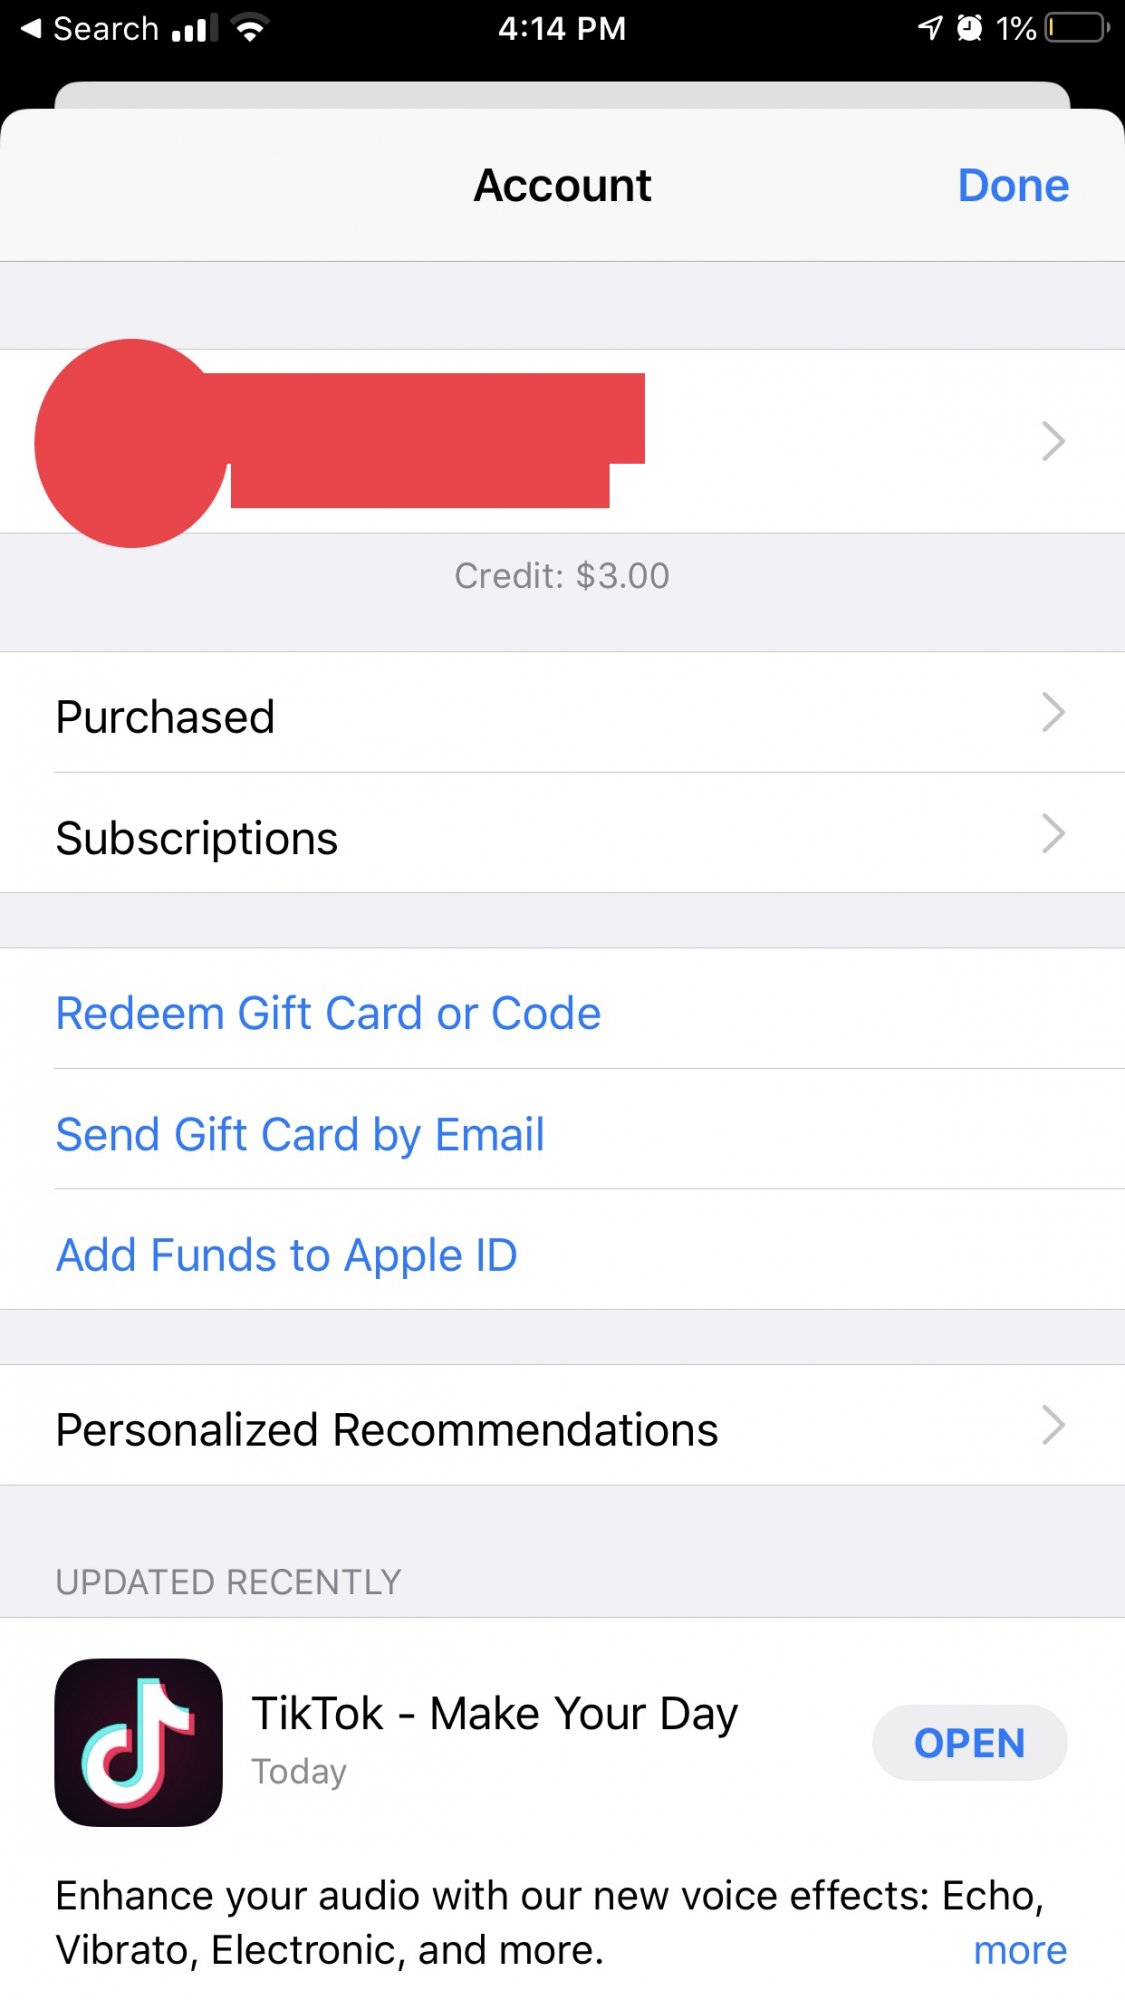 Apple's new universal gift card can be used to purchase